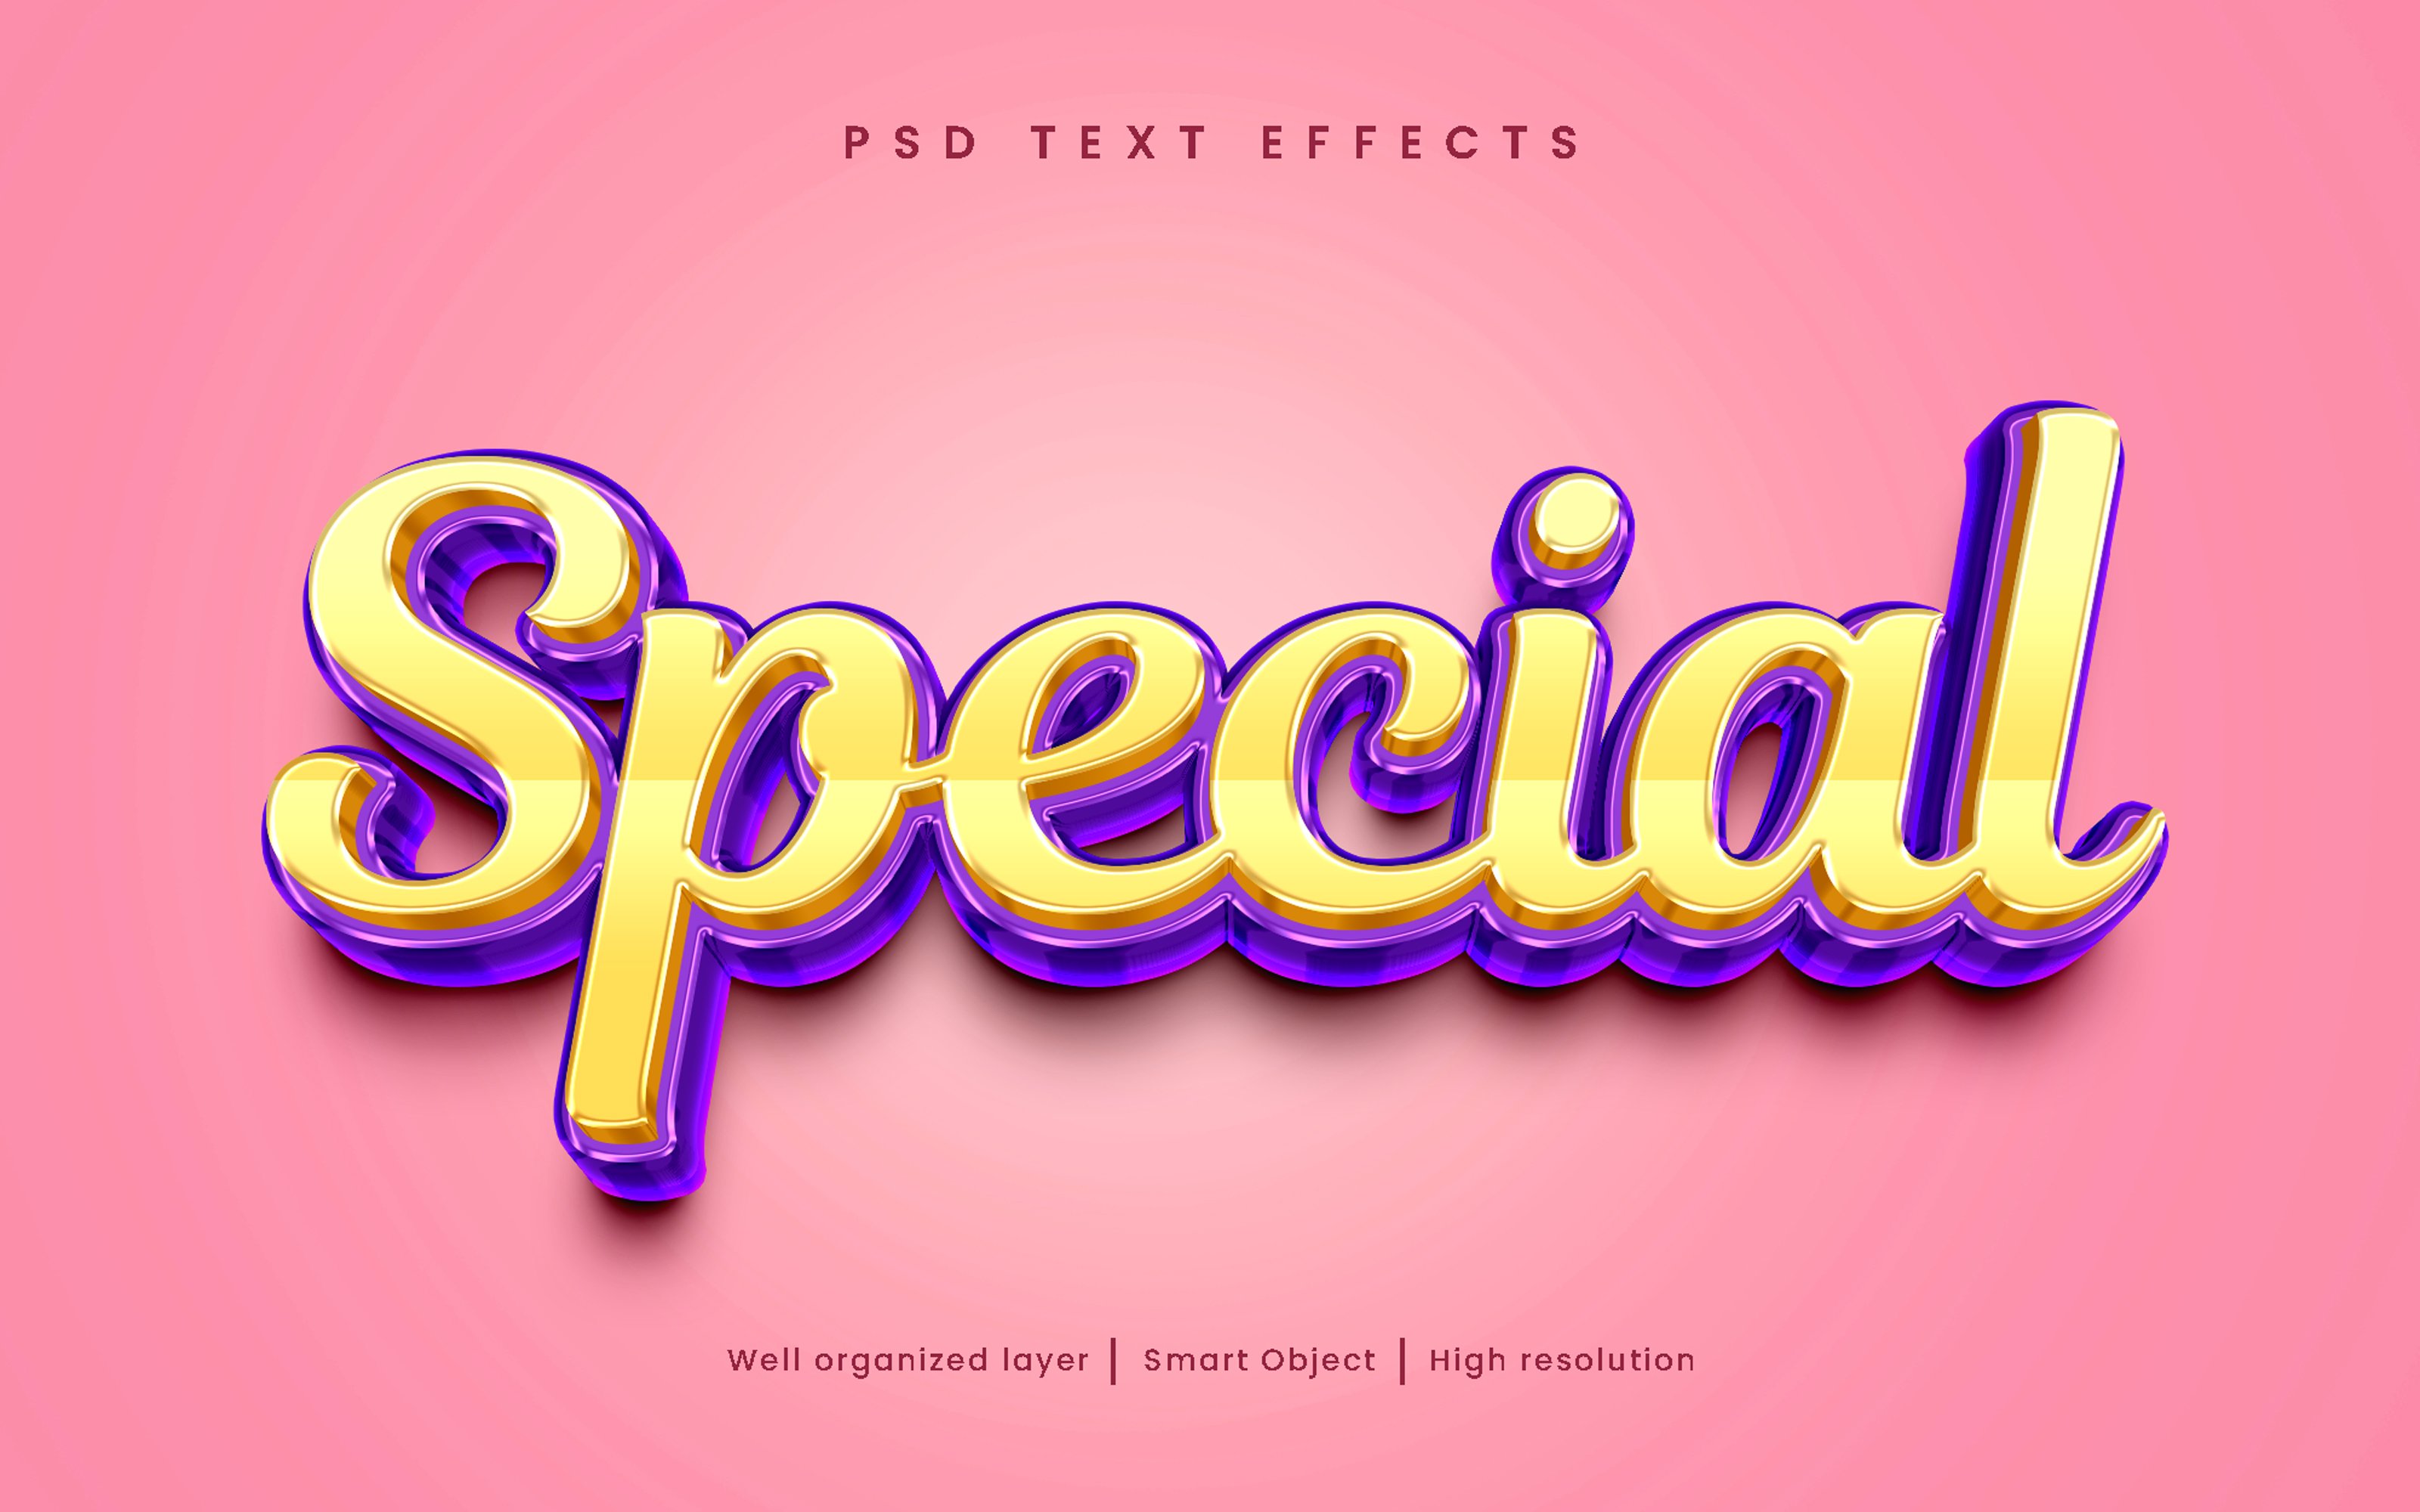 3D Special editable text effect PSDcover image.